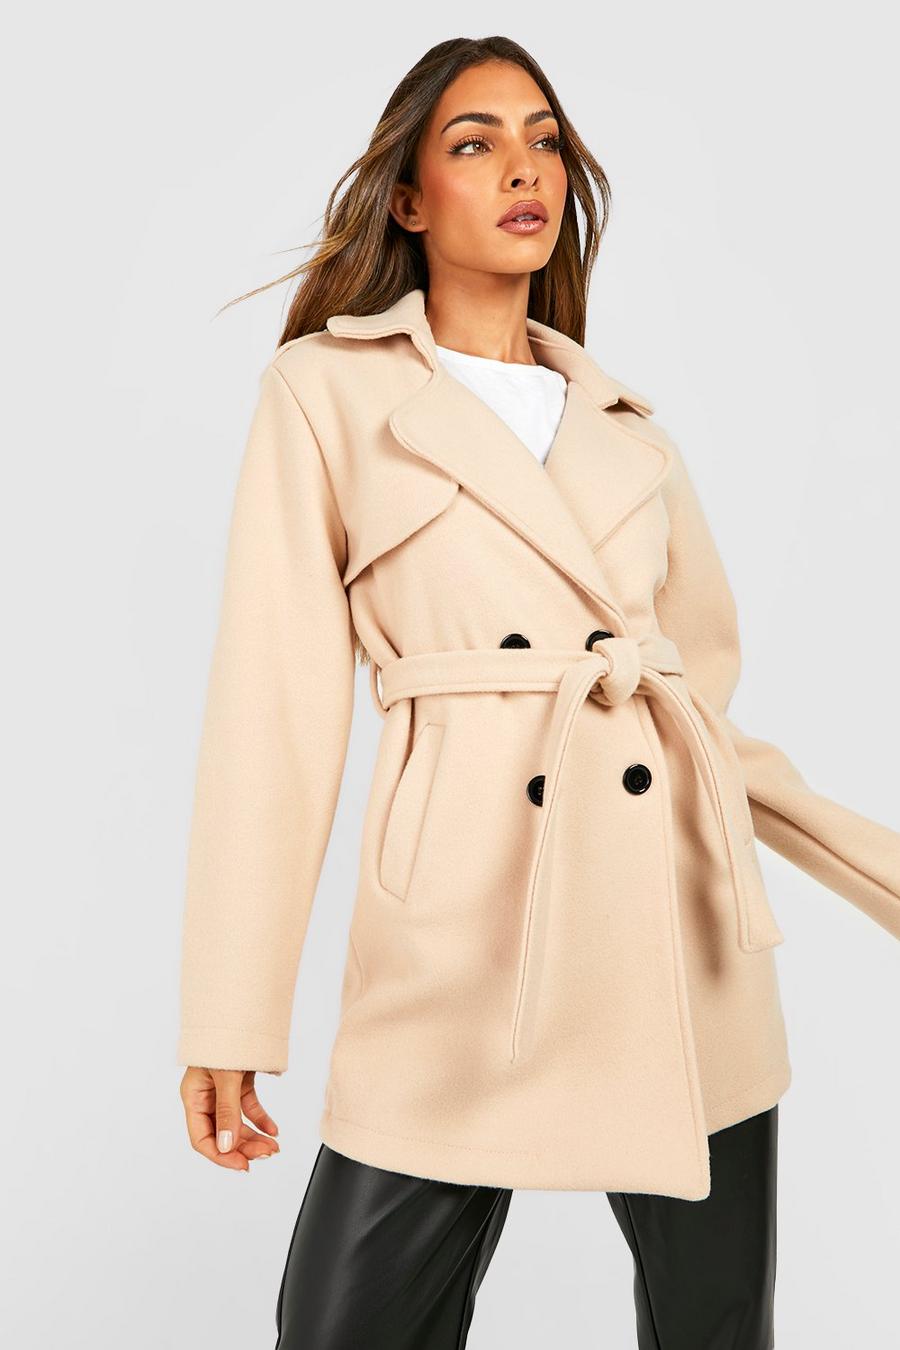 Stone beige Belted Wool Look Trench Coat